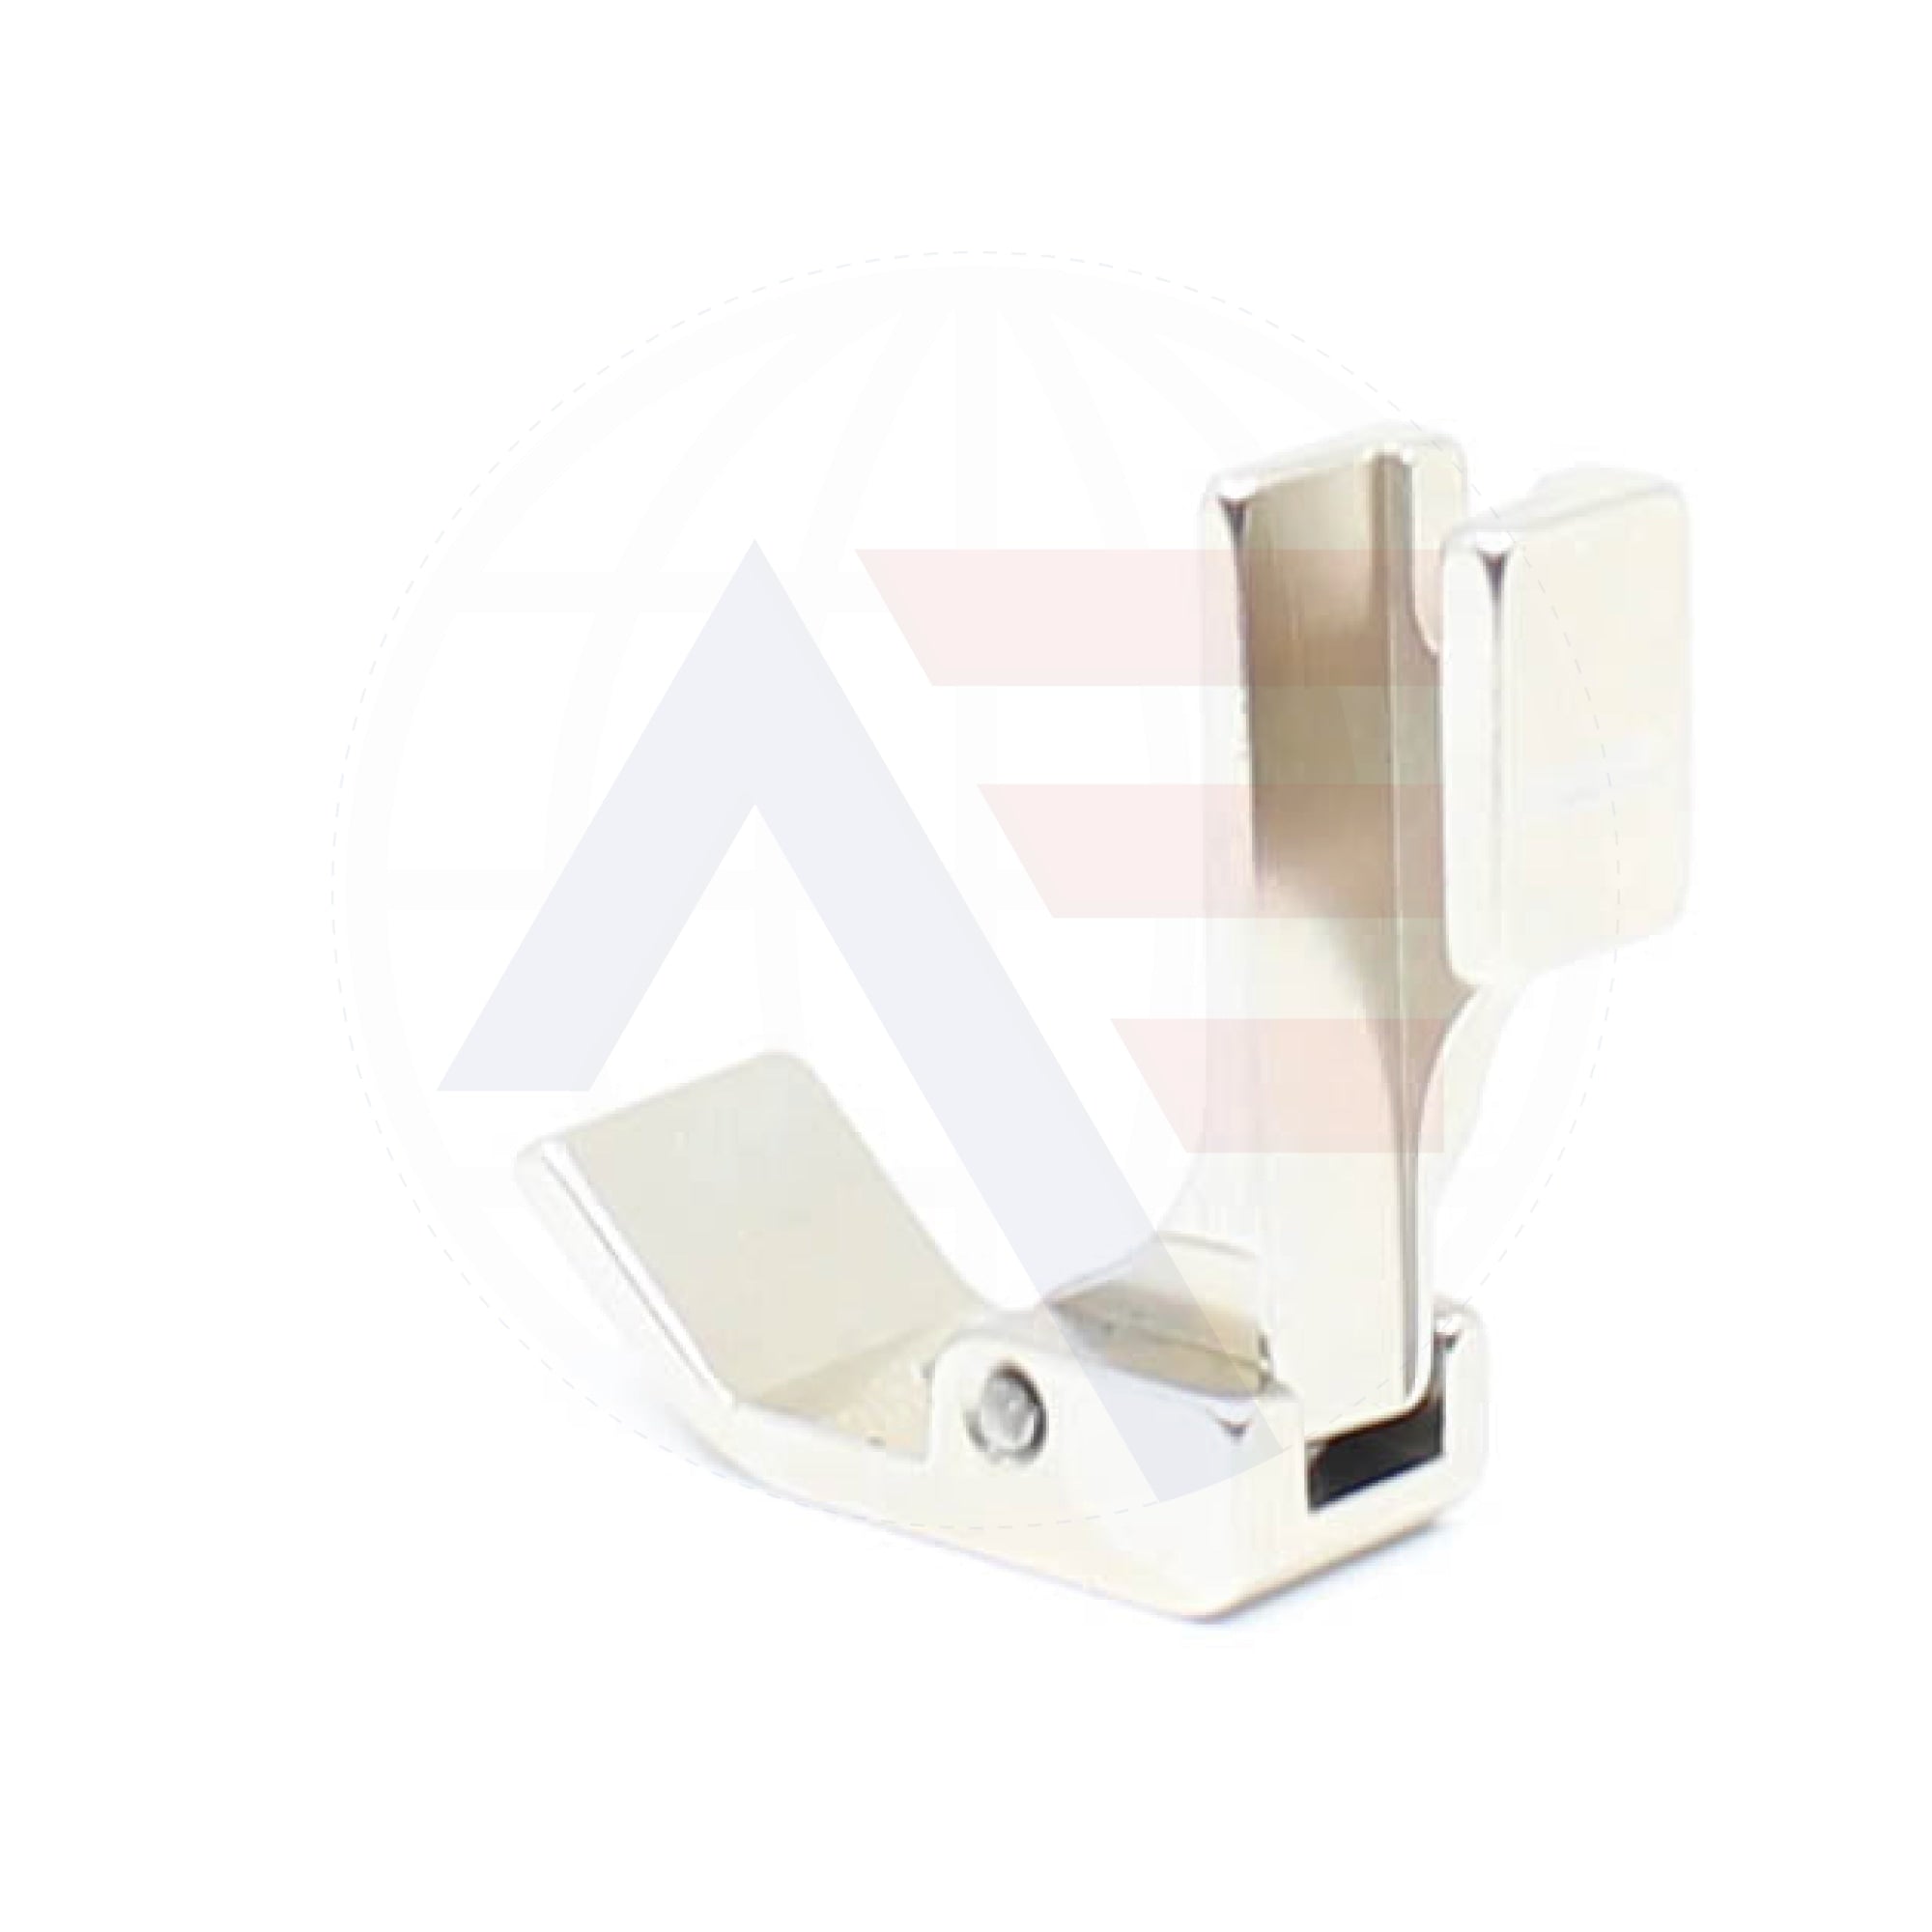 S538 Hemming Foot Sewing Machine Spare Parts